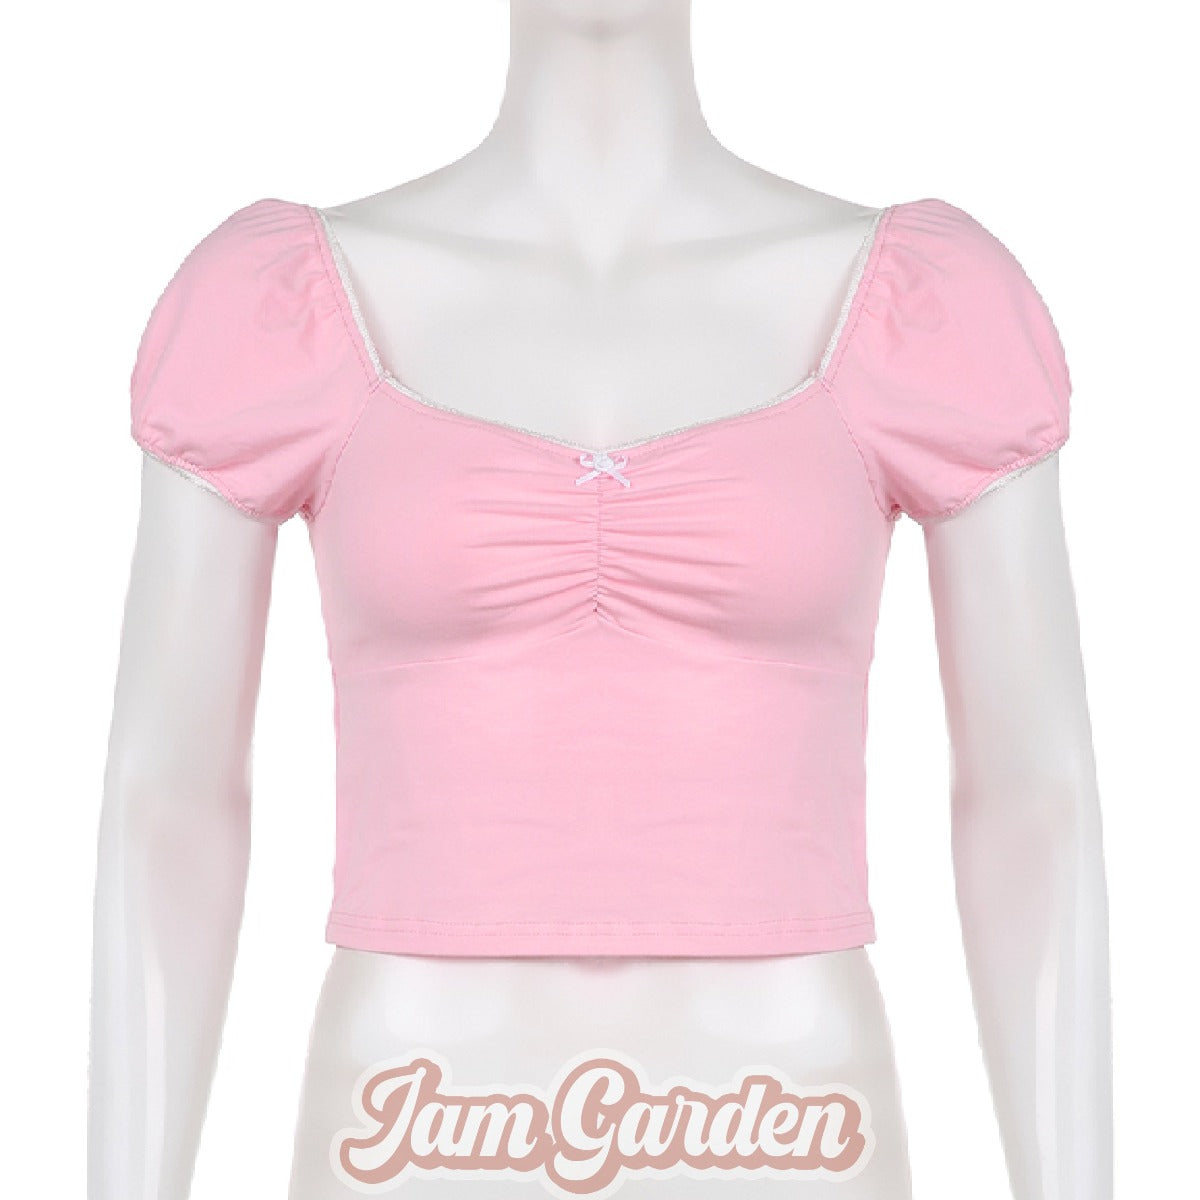 [Shimmer Barbie] Retro Square Neck Lace Stitching Short Sleeve Top - Jam Garden